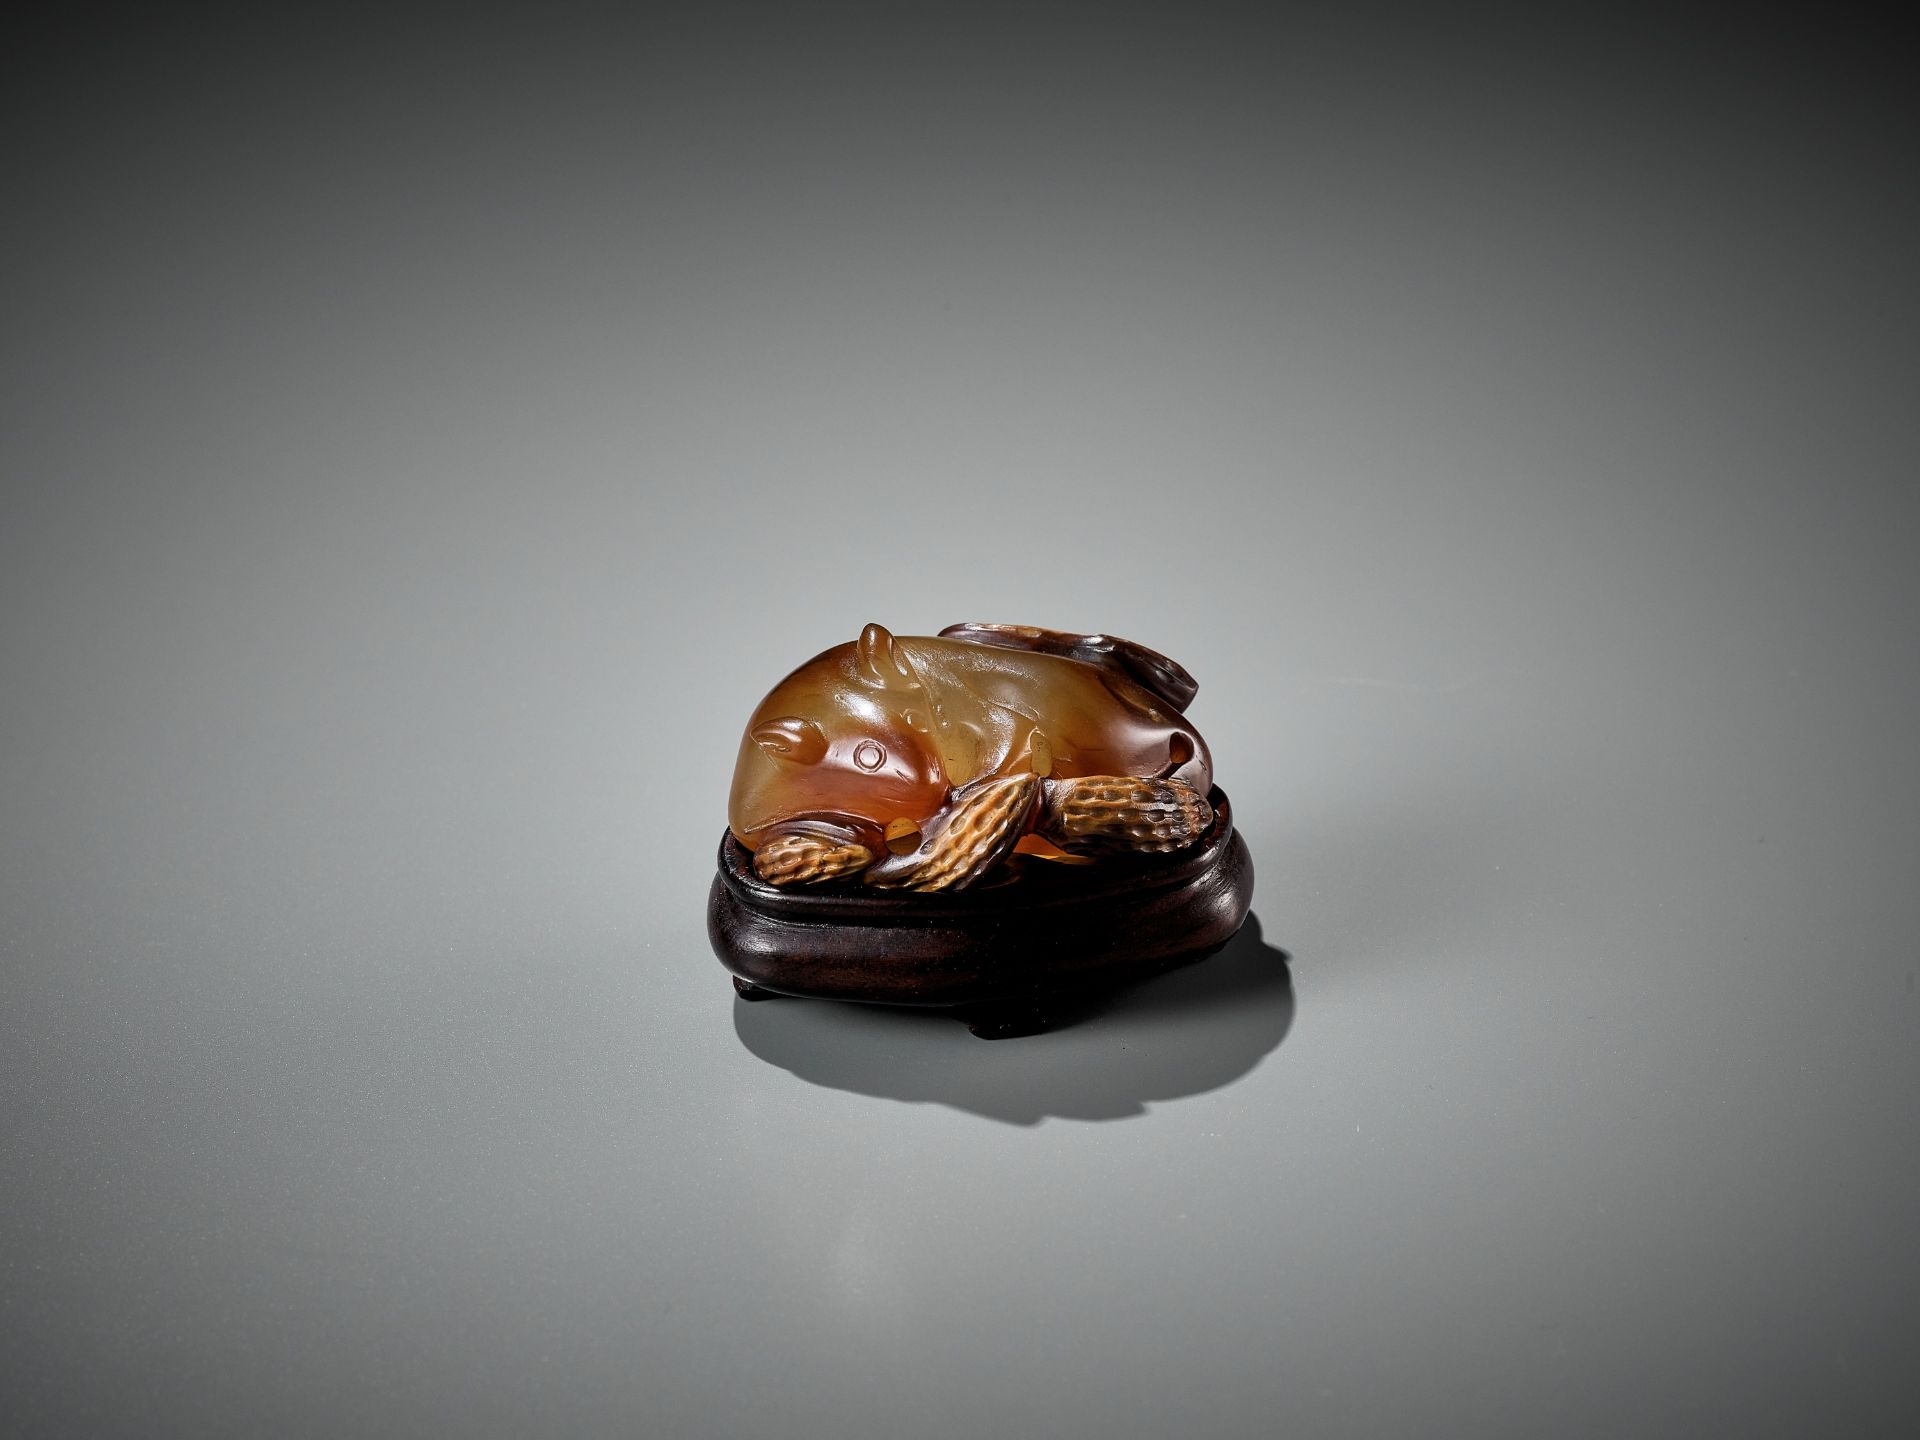 AN AGATE PENDANT OF A SQUIRREL WITH PEANUTS, 18TH-19TH CENTURY - Image 3 of 14